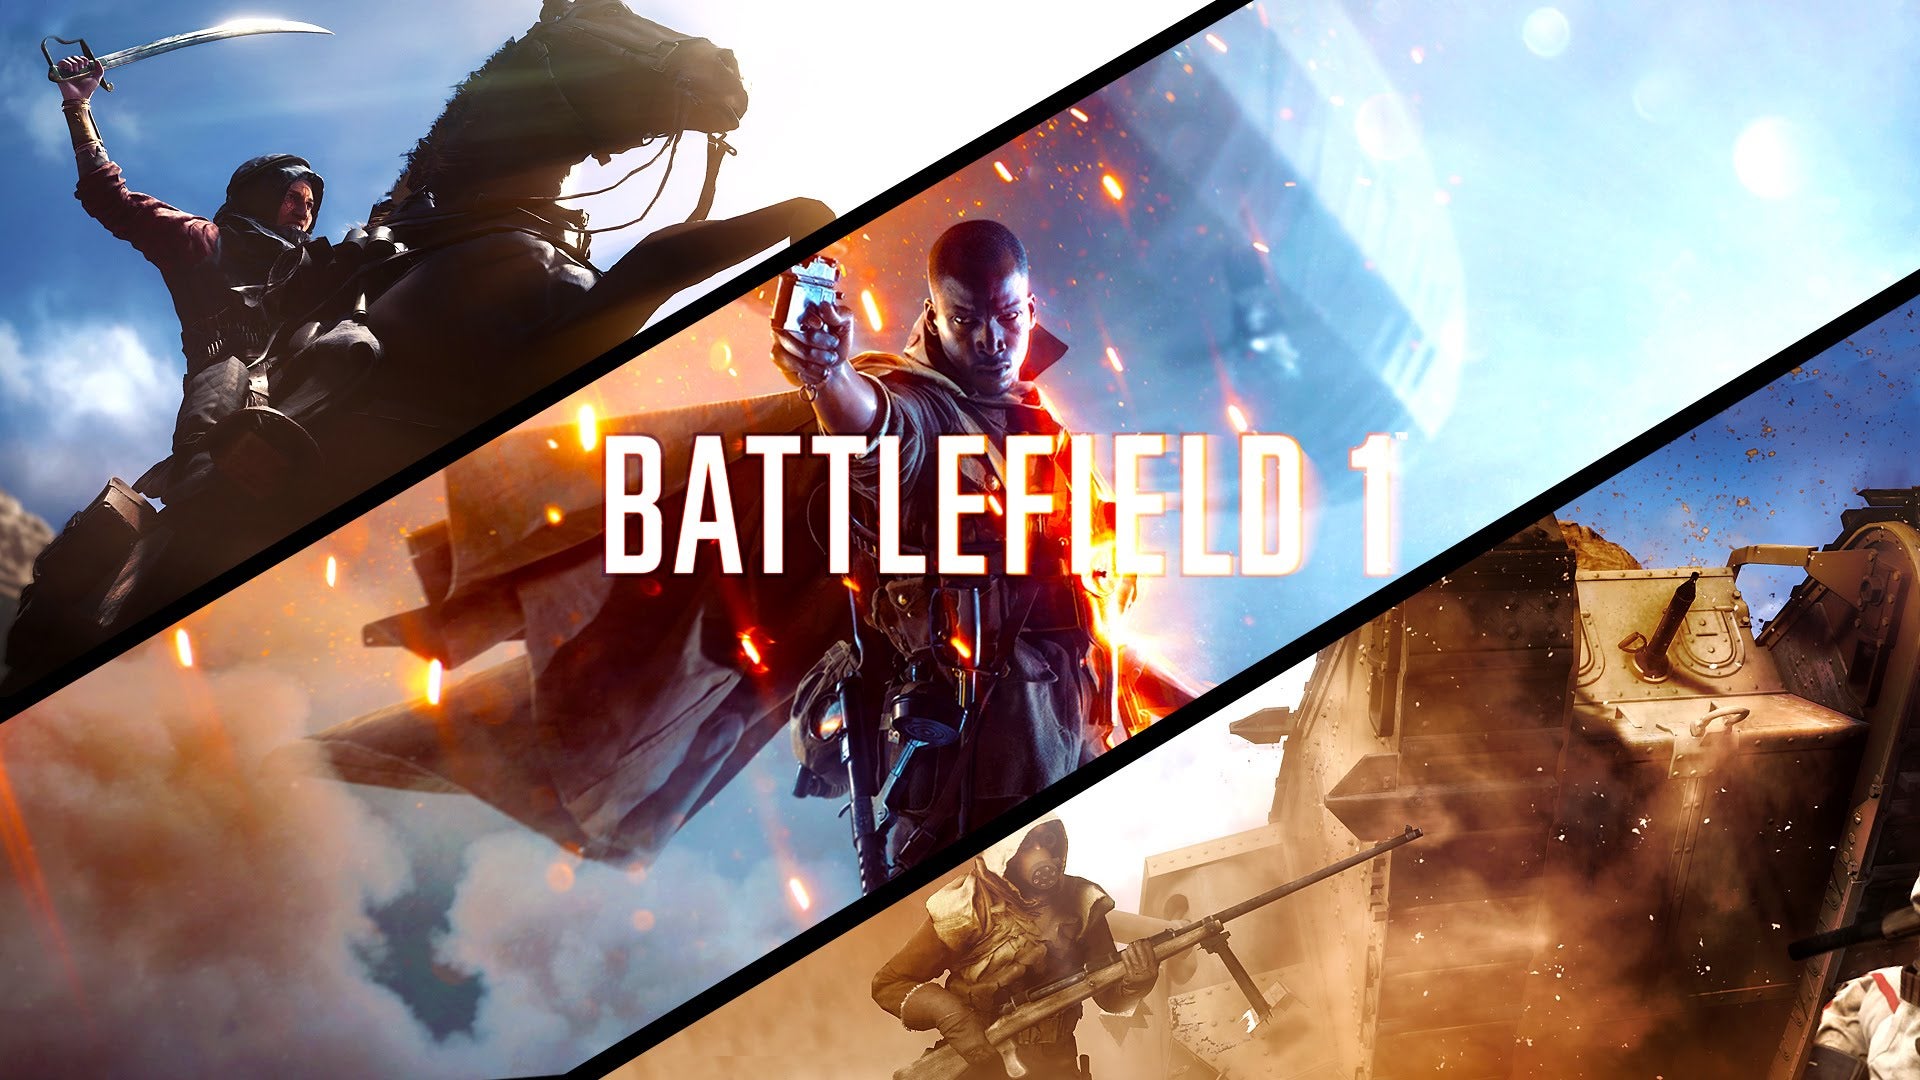 Image for Let's Play Battlefield 1 PC at 4K 60fps